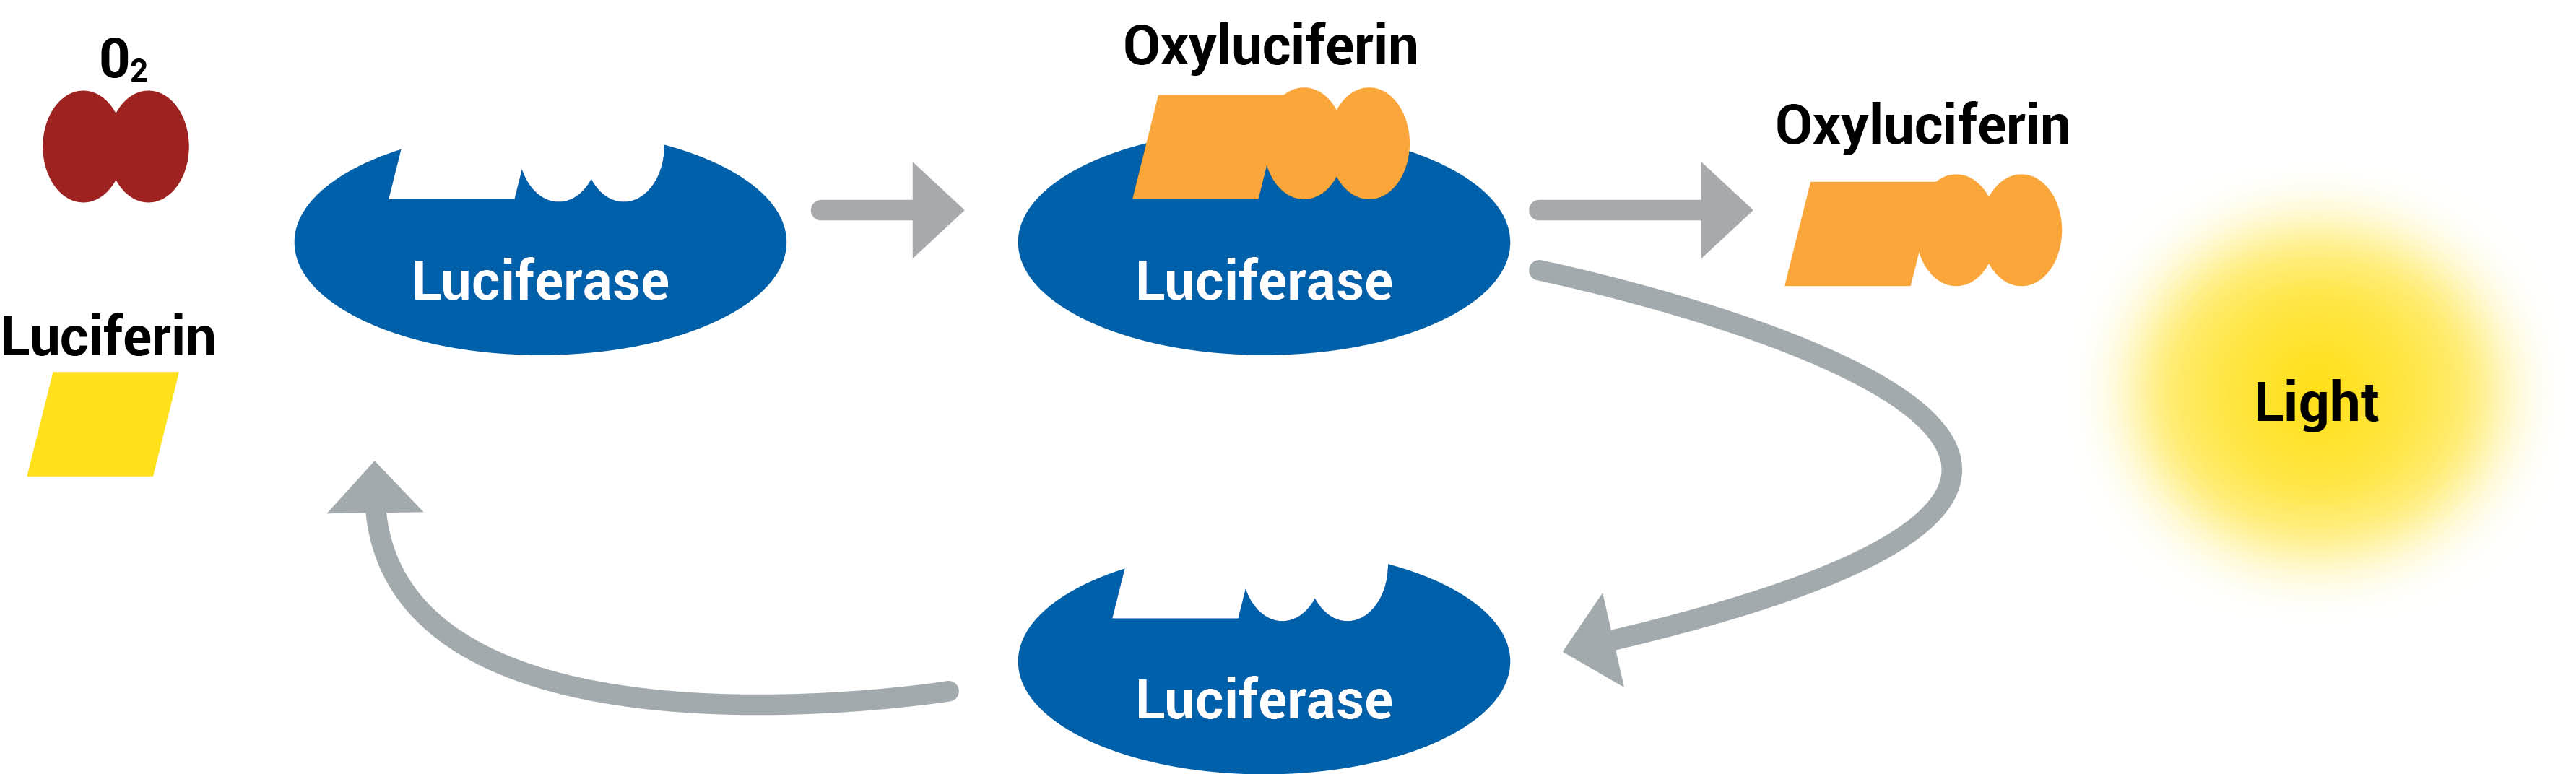 The enzyme, luciferase, helps bond together the substrate, luciferin, and oxygen. The reaction creates the products oxyluciferin and light. The enzyme is recycled after the reaction, and can be used again.